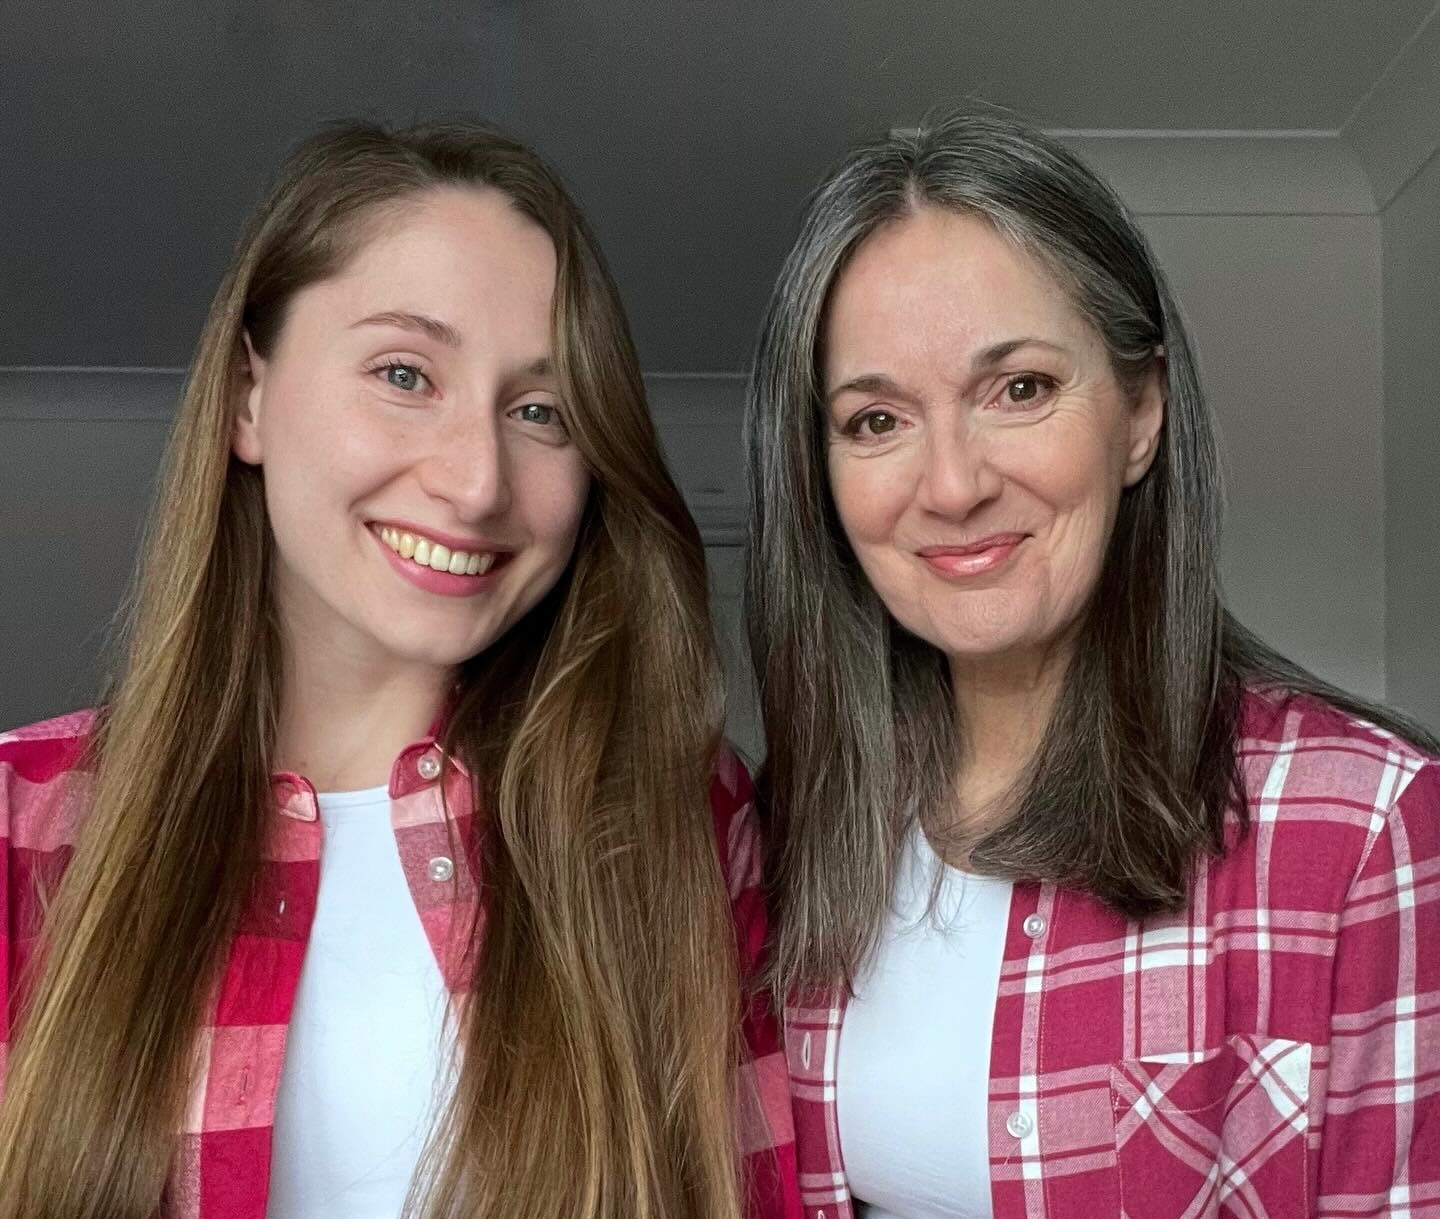 An awe-inspiring grandmother and her daughter share an uncanny resemblance, sparking debates over who's who in their hilarious Instagram video.